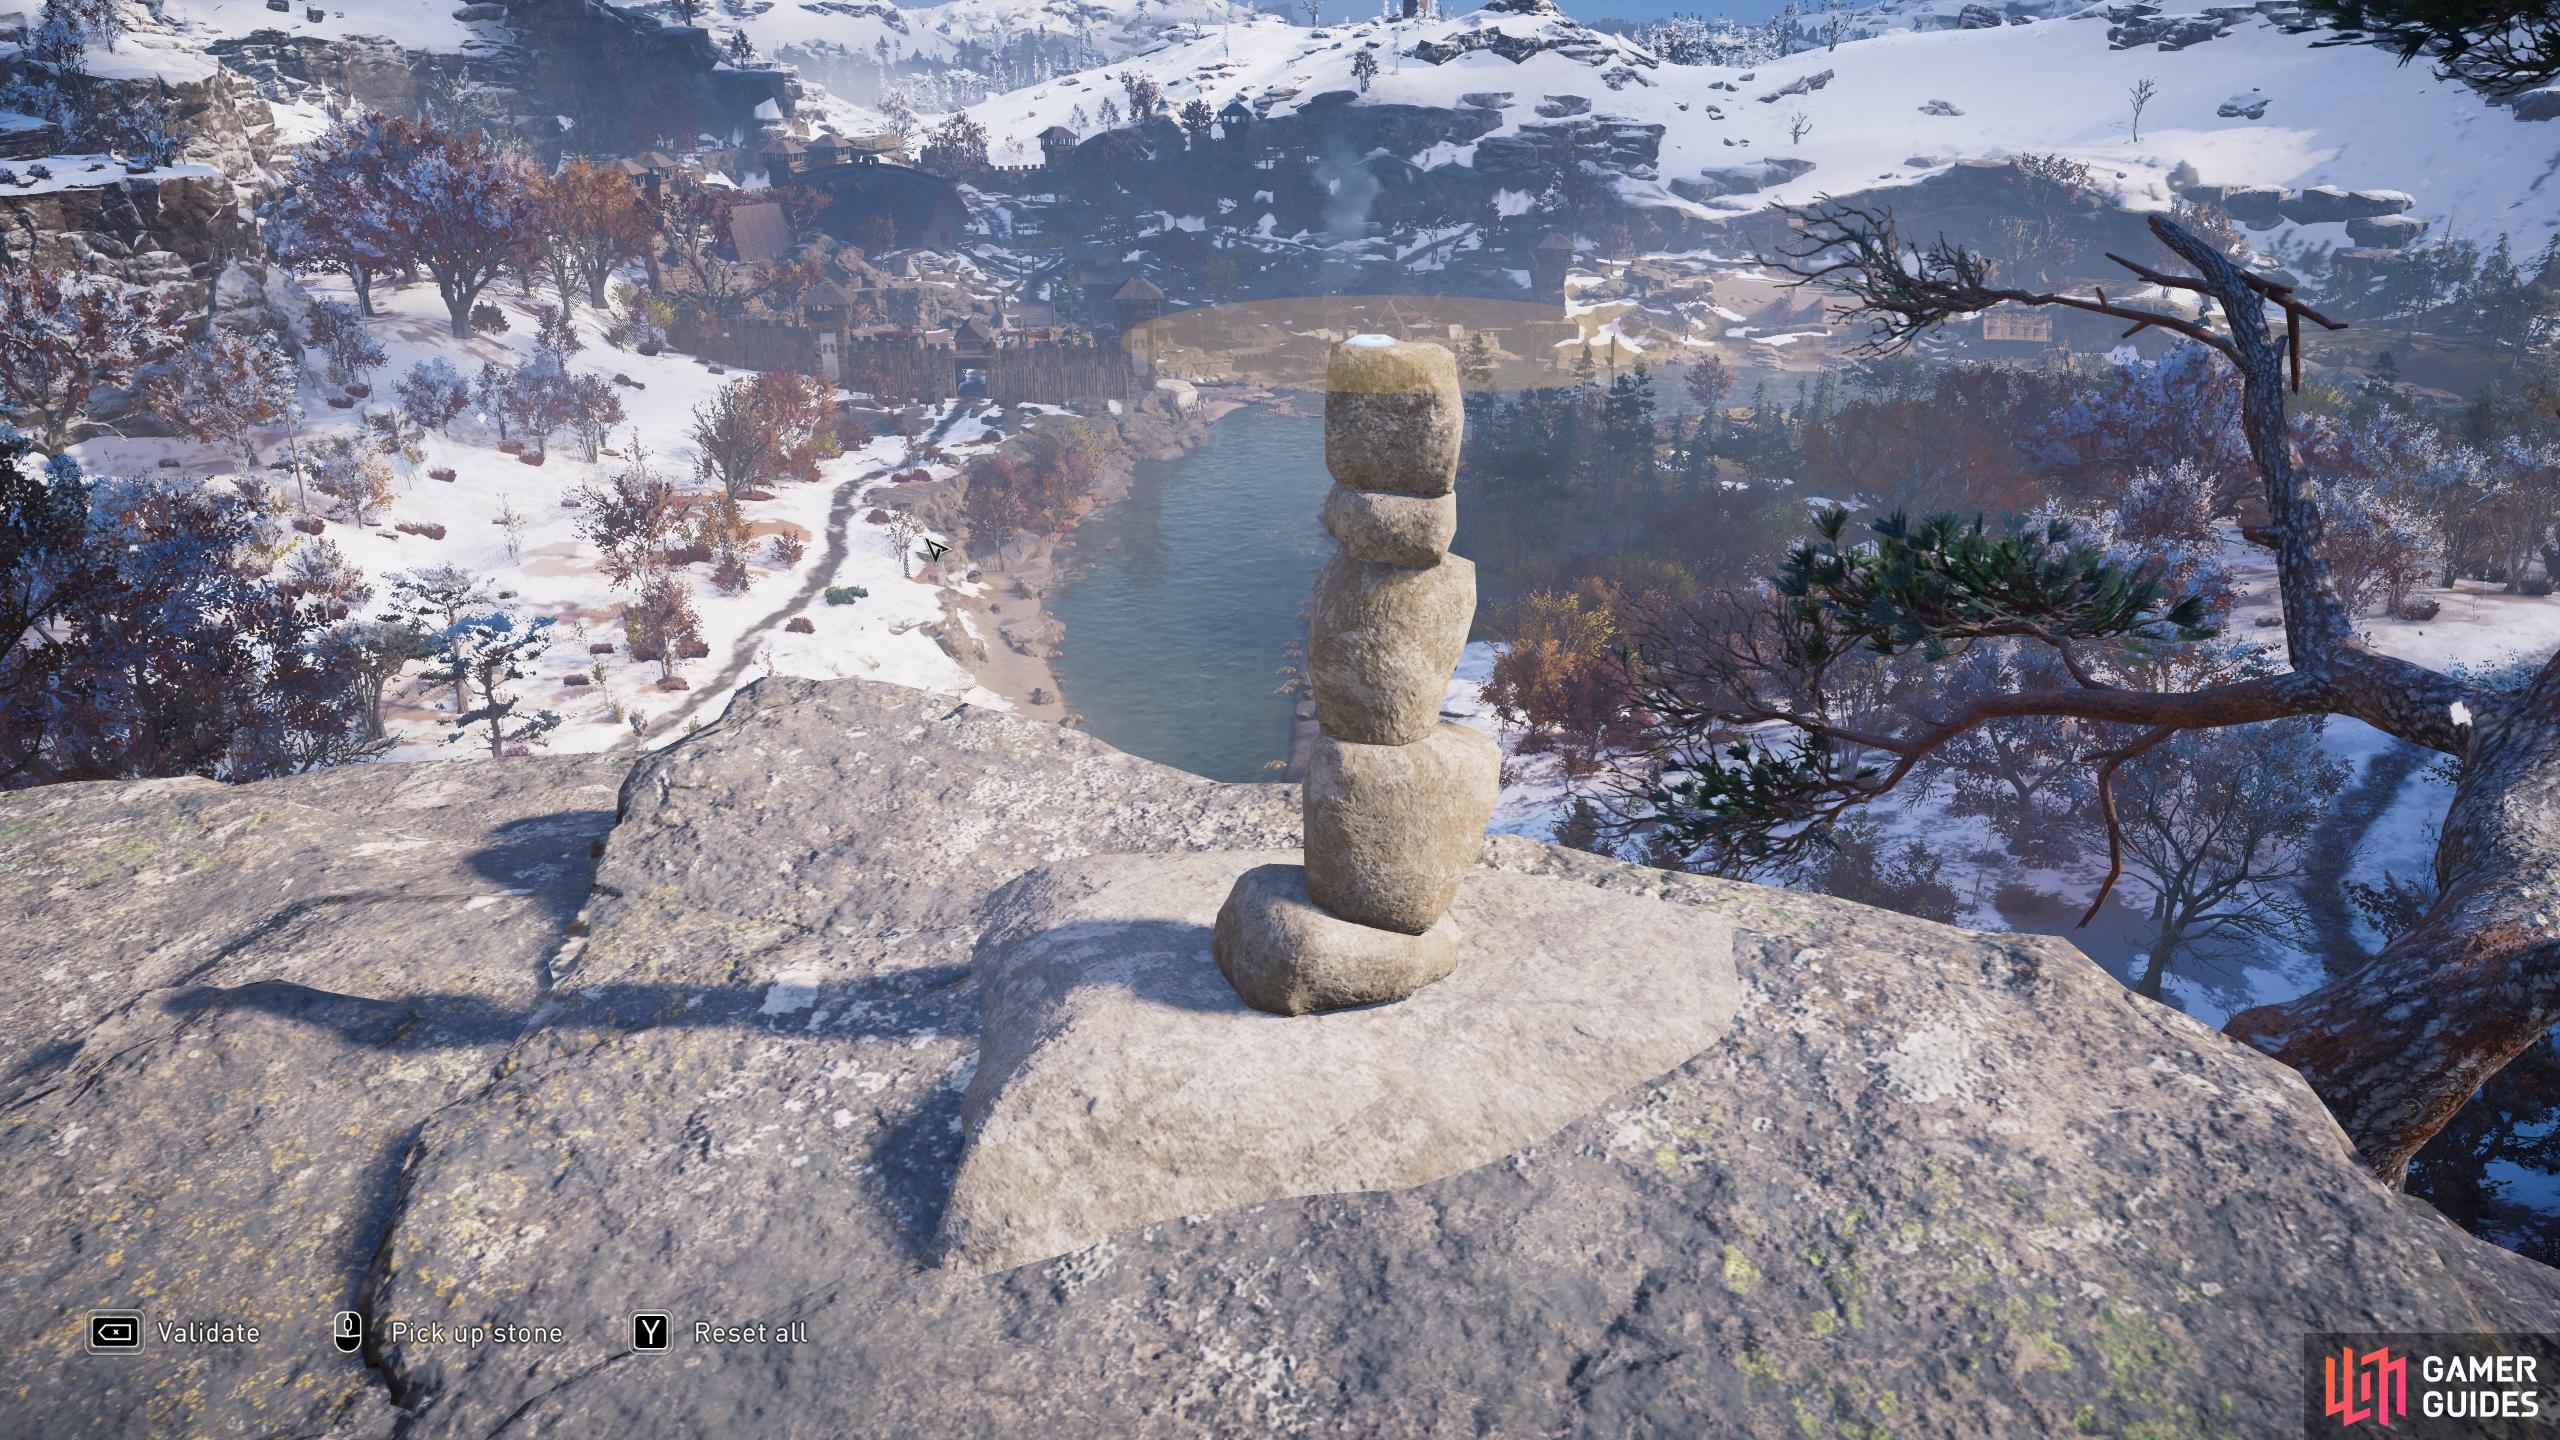 Once you've stacked the stones to the required height, you'll be able to validate their position.